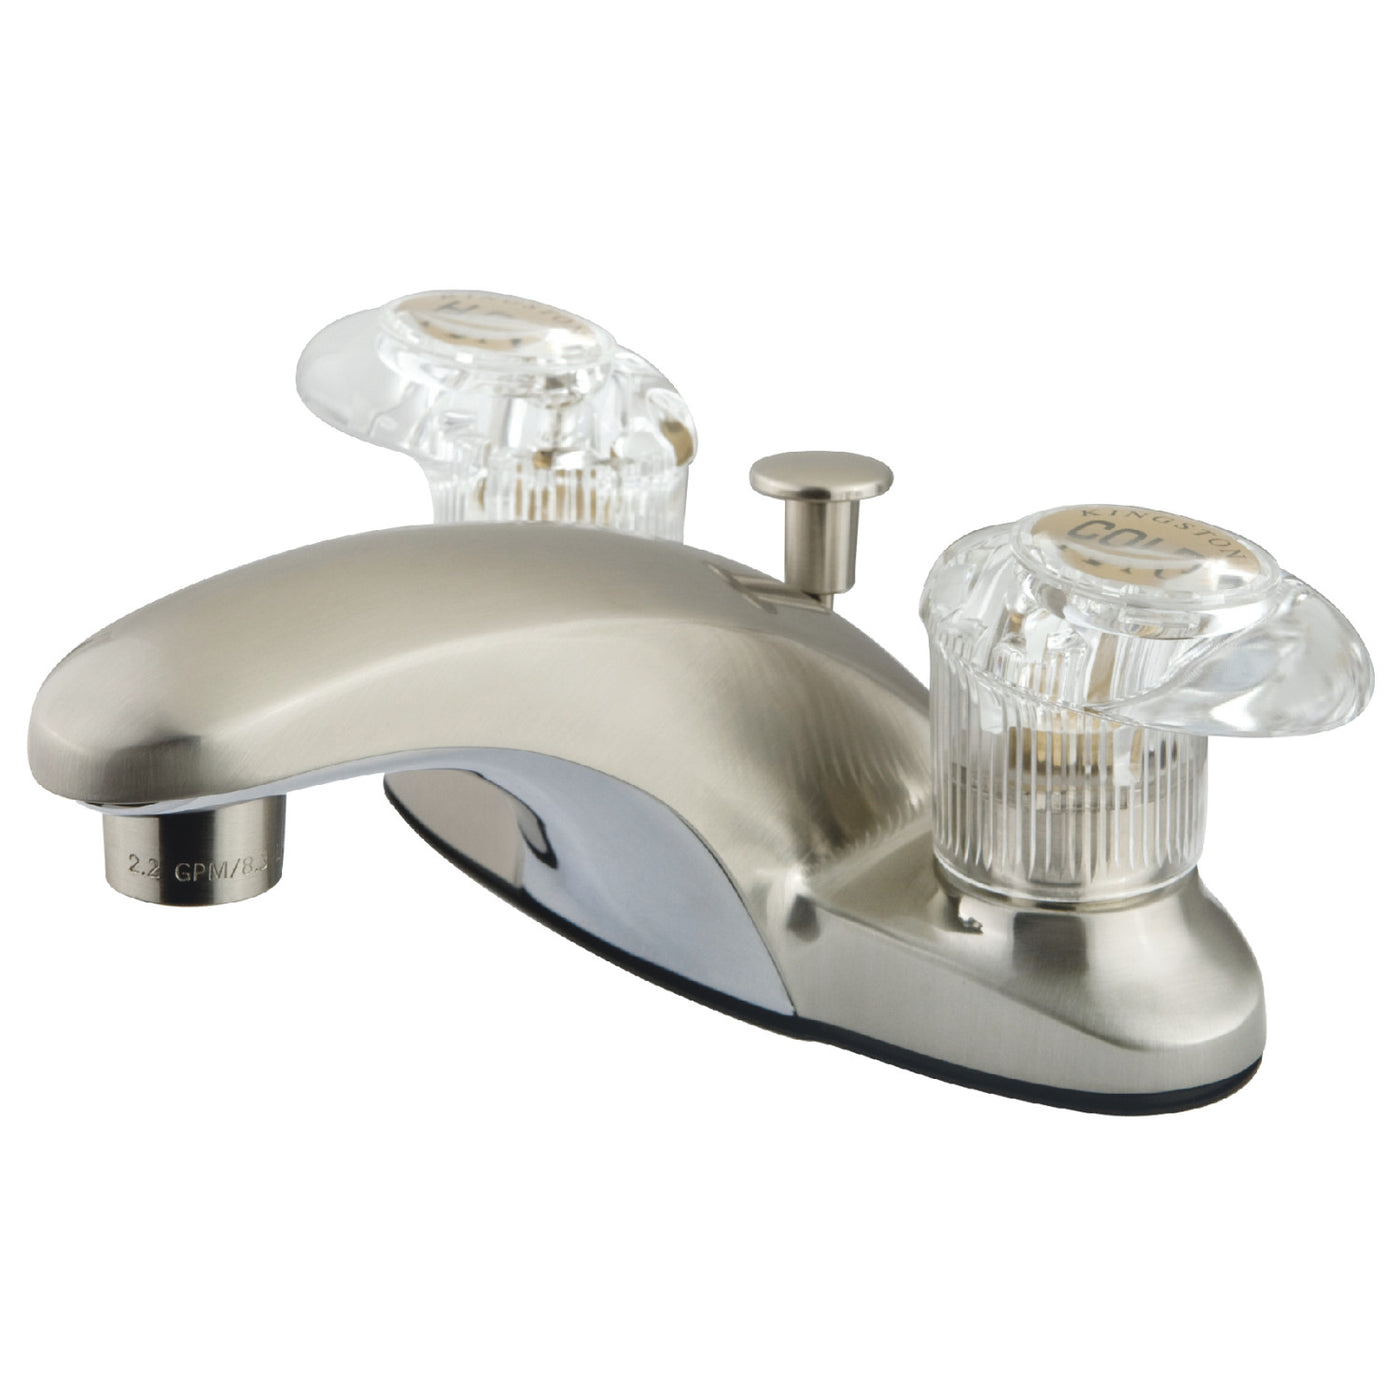 Elements of Design EB6158ALL 4-Inch Centerset Bathroom Faucet, Brushed Nickel